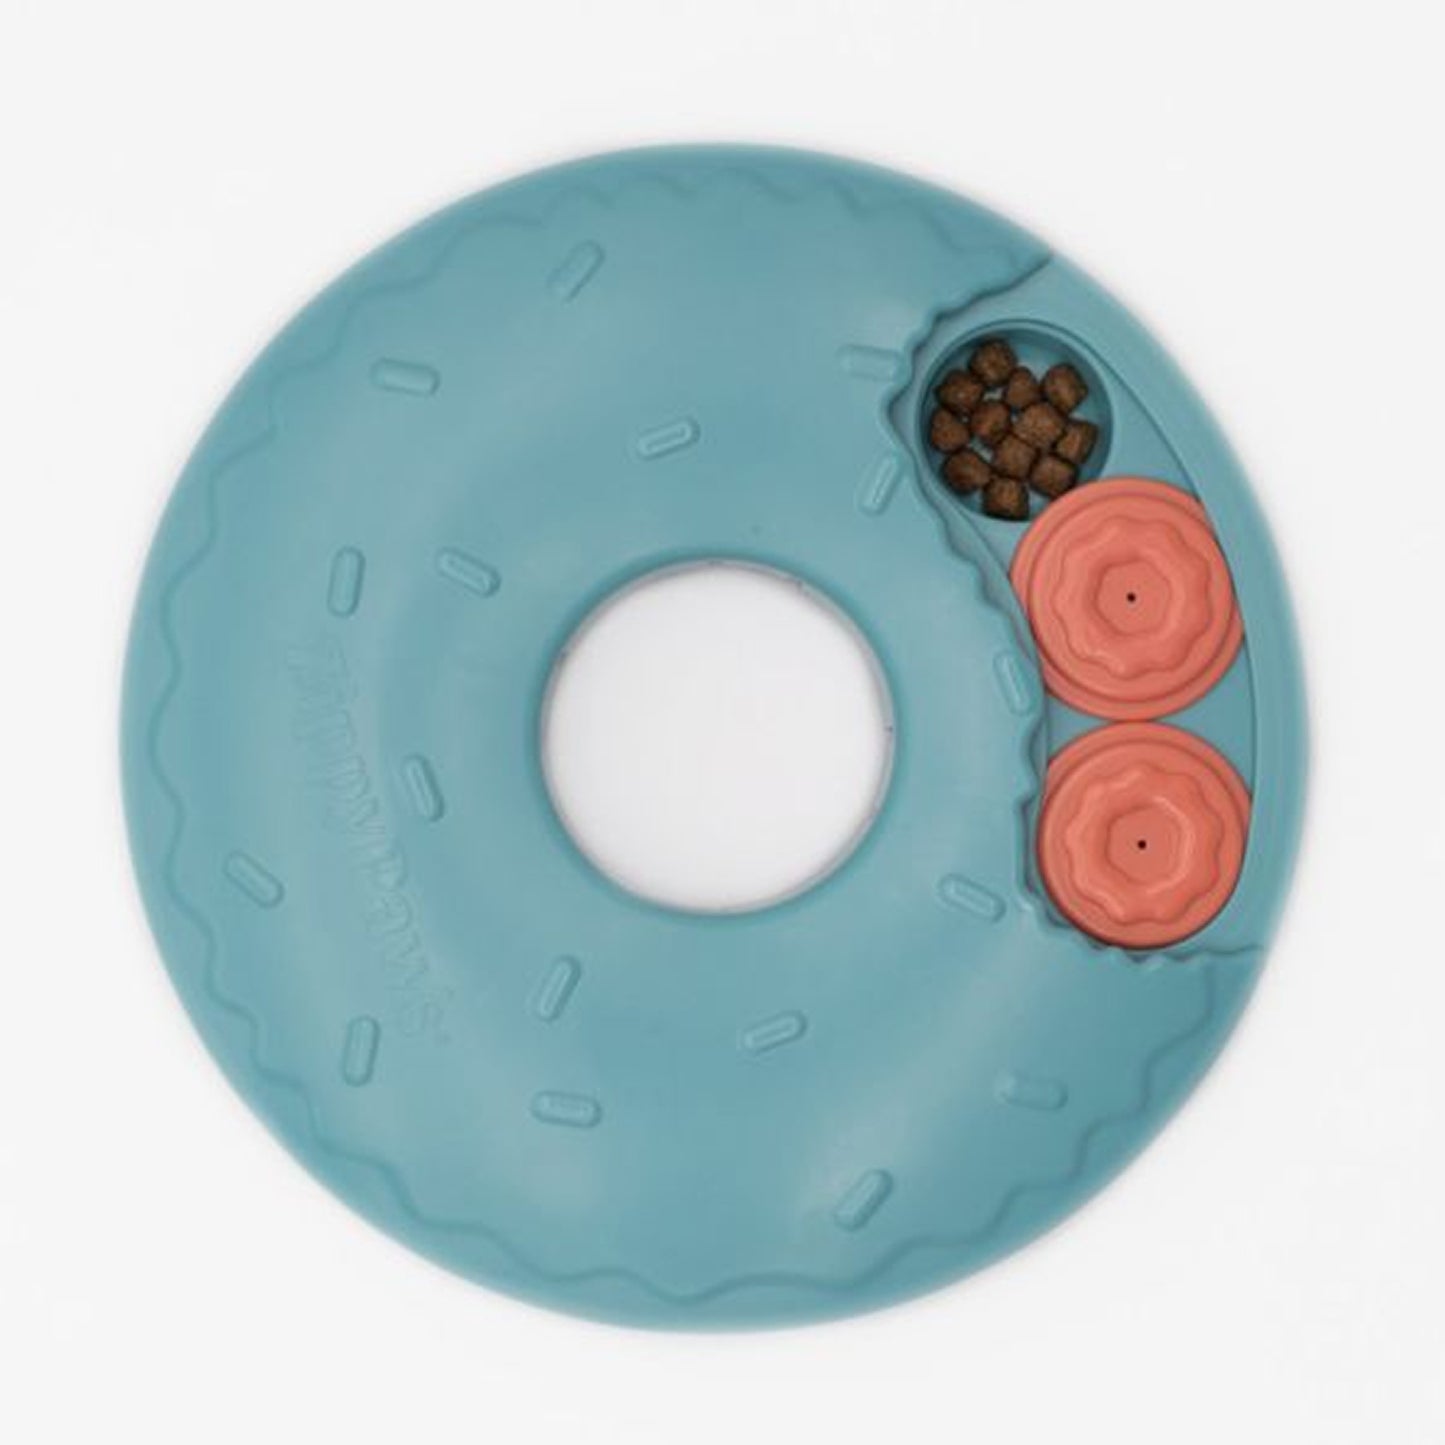 Zippy Paws Smartypaws Puzzler Donut Slider